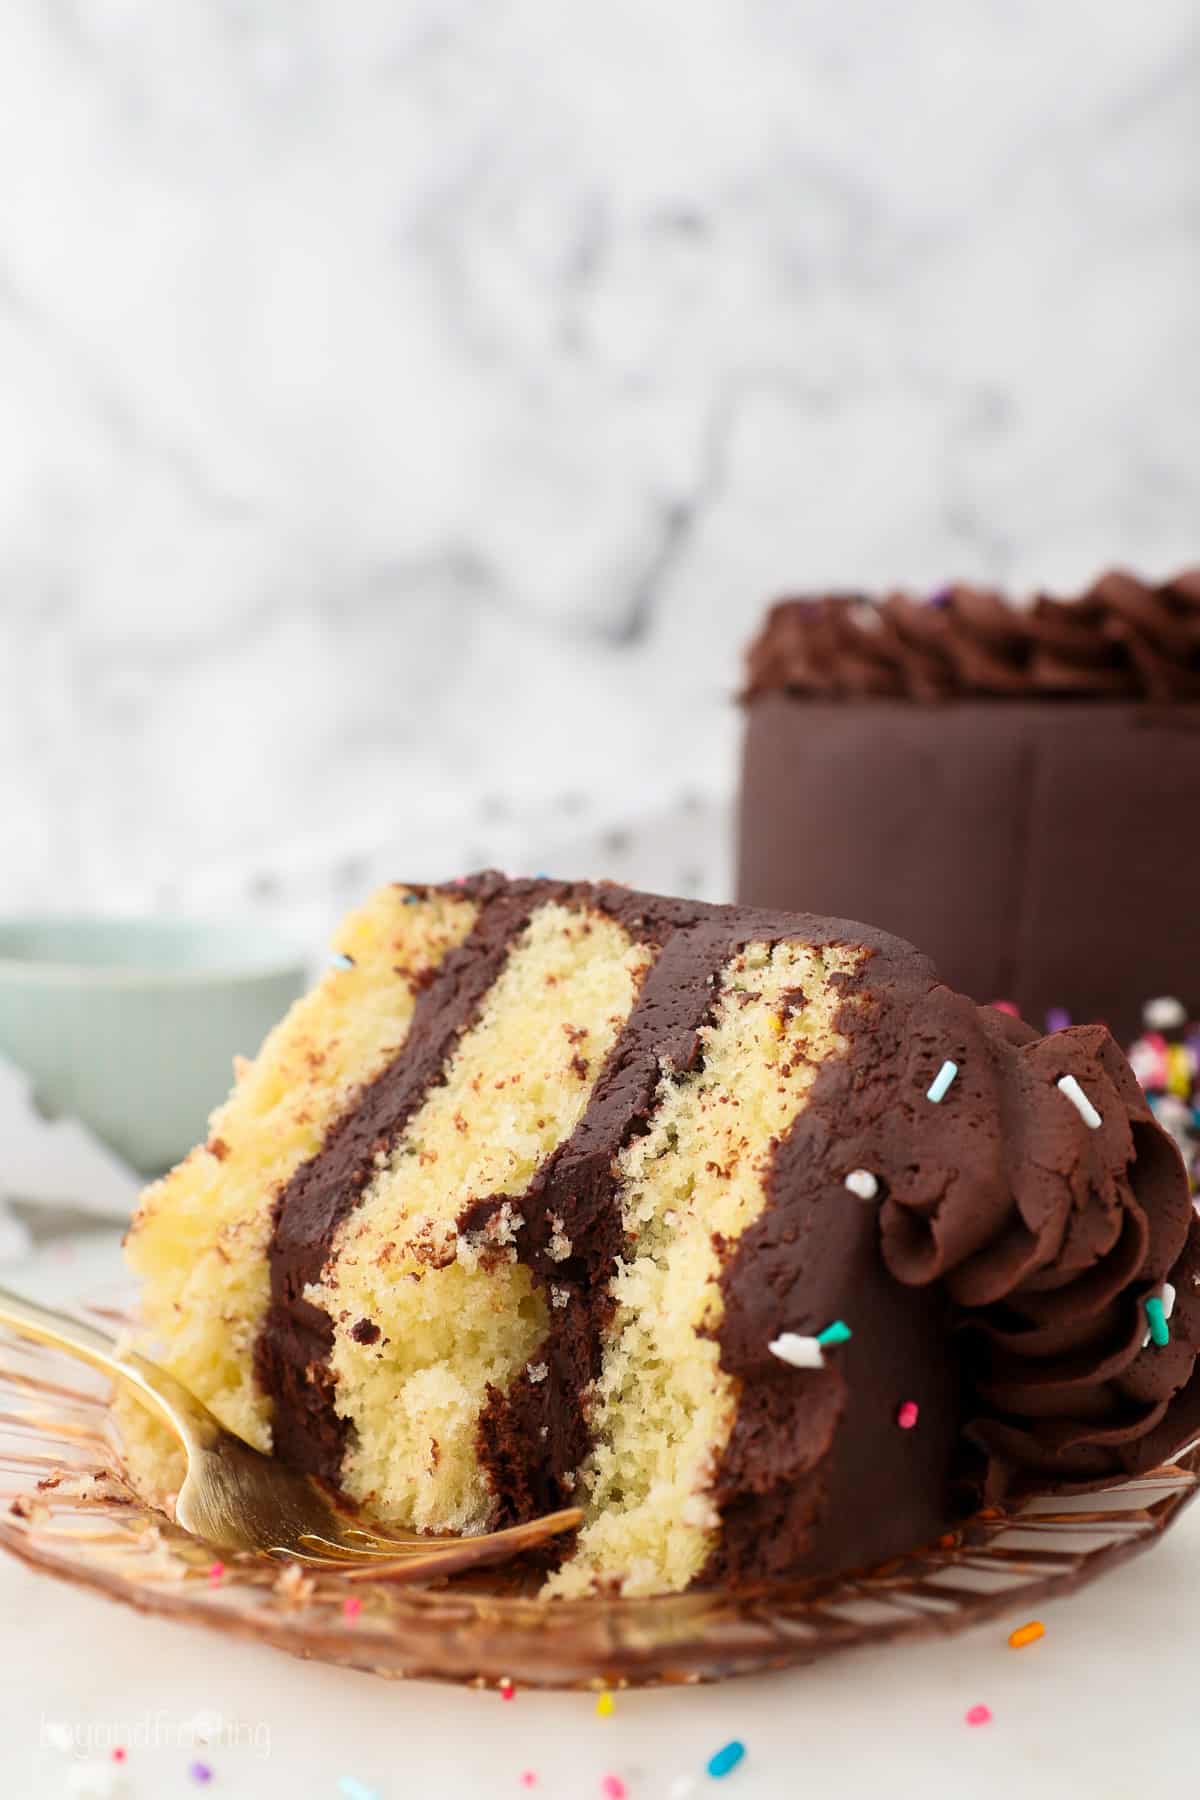 A partially eaten slice of yellow layer cake with chocolate frosting on a plate, with the rest of the cake in the background.